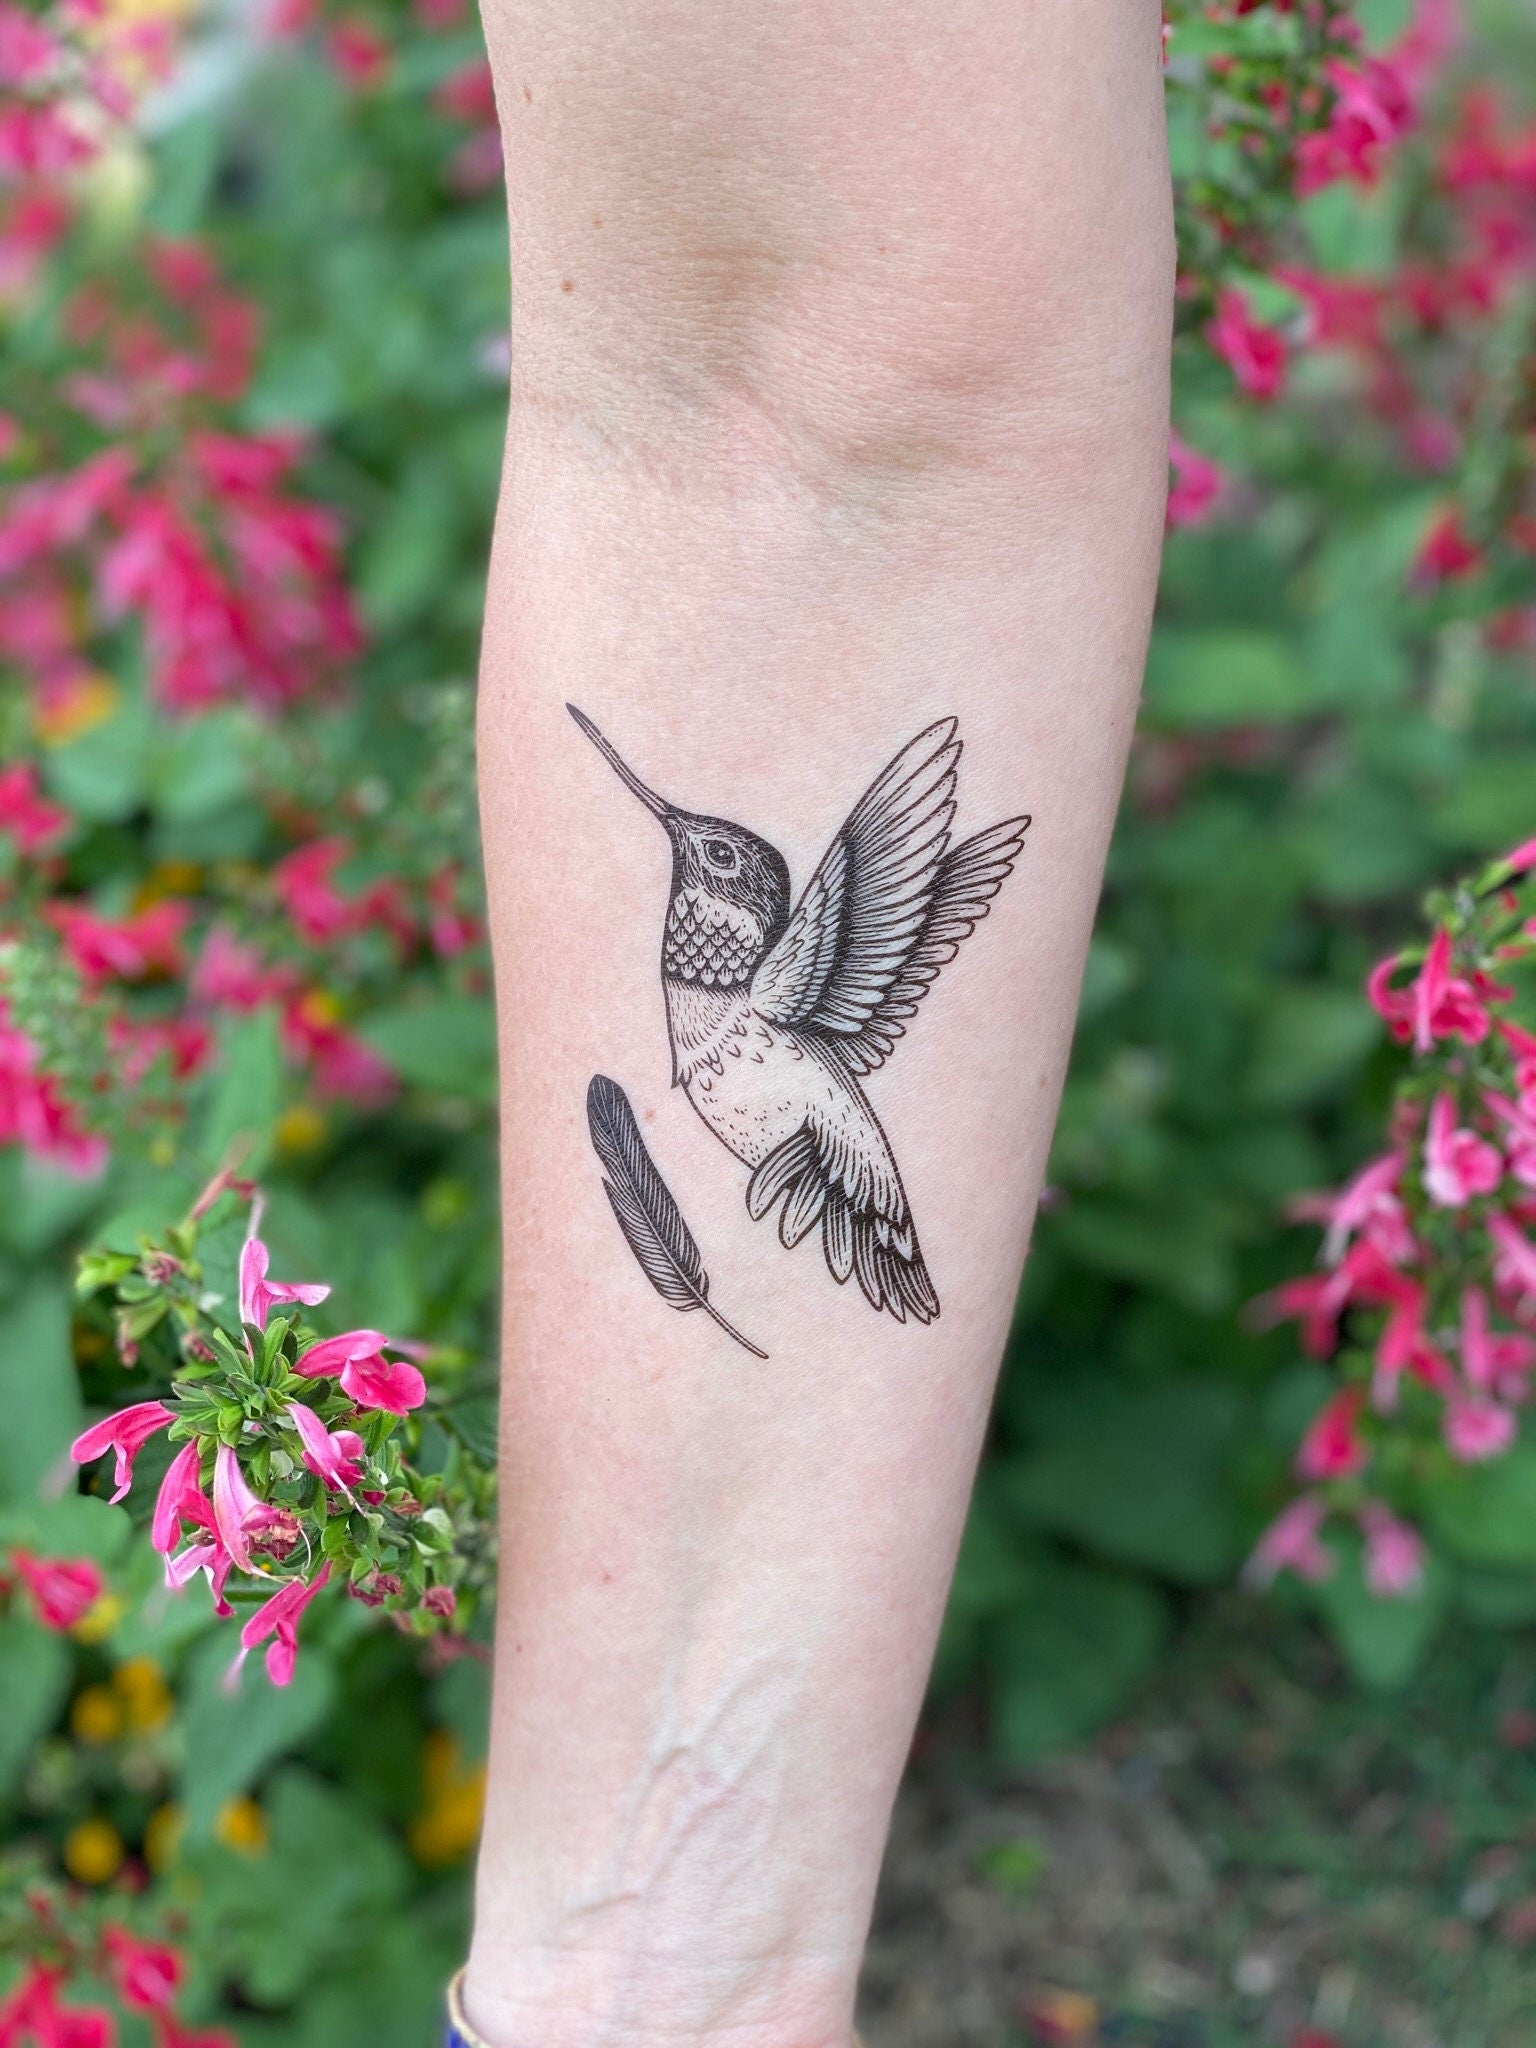 Colorful Hummingbird Temporary Bird Tattoo Set For Women And Girls  Lavender, Plum Blossom, And More Perfect For Weddings And Neck Tattooing  Z0403 From Misihan09, $3.78 | DHgate.Com